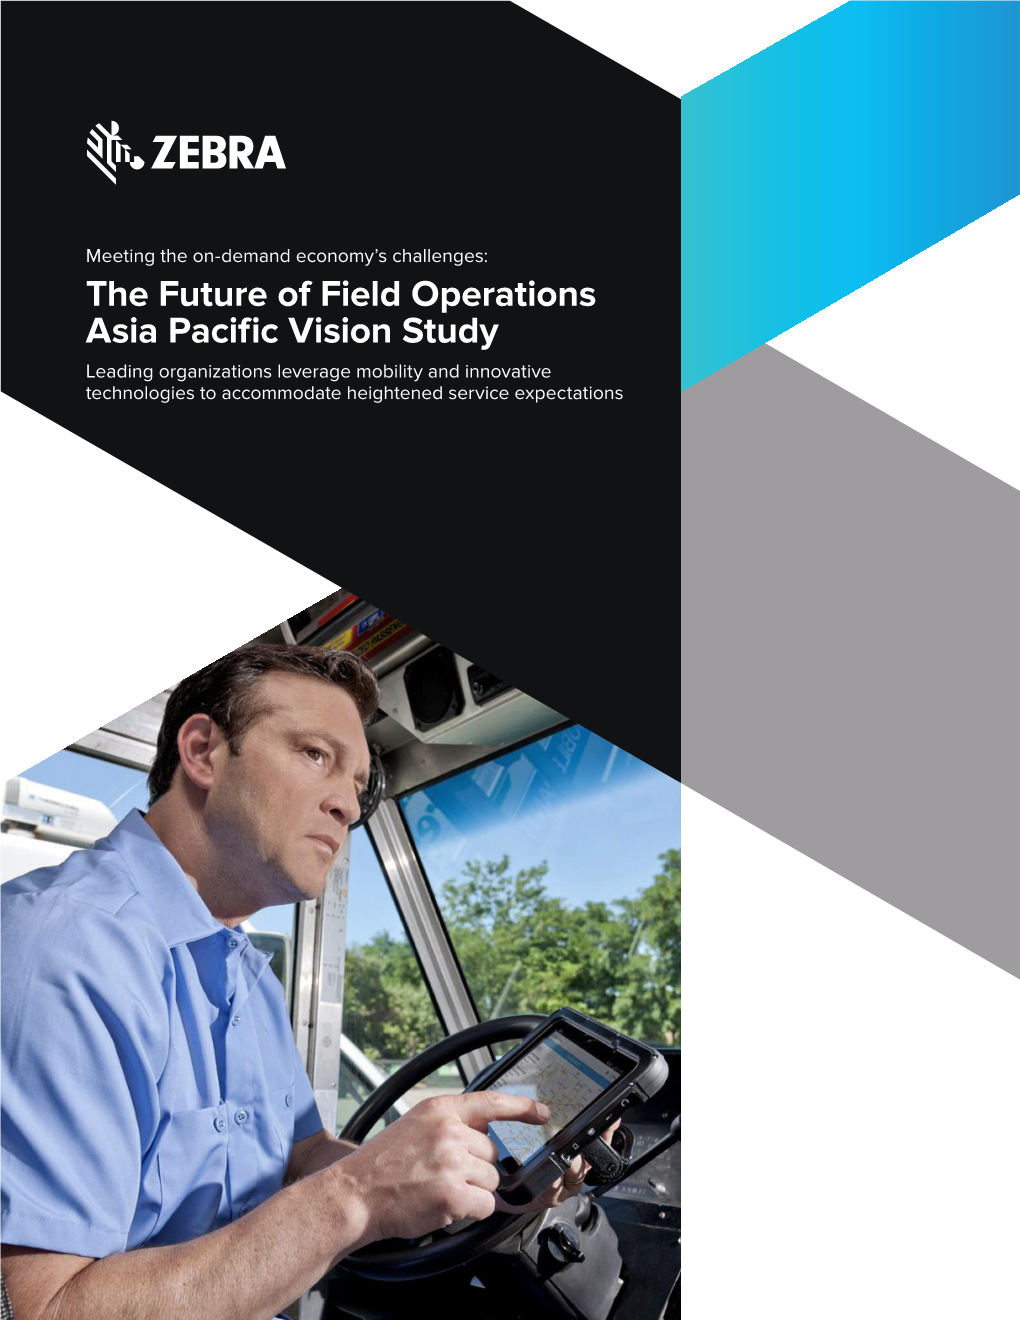 The Future of Field Operations Asia Pacific Vision Study